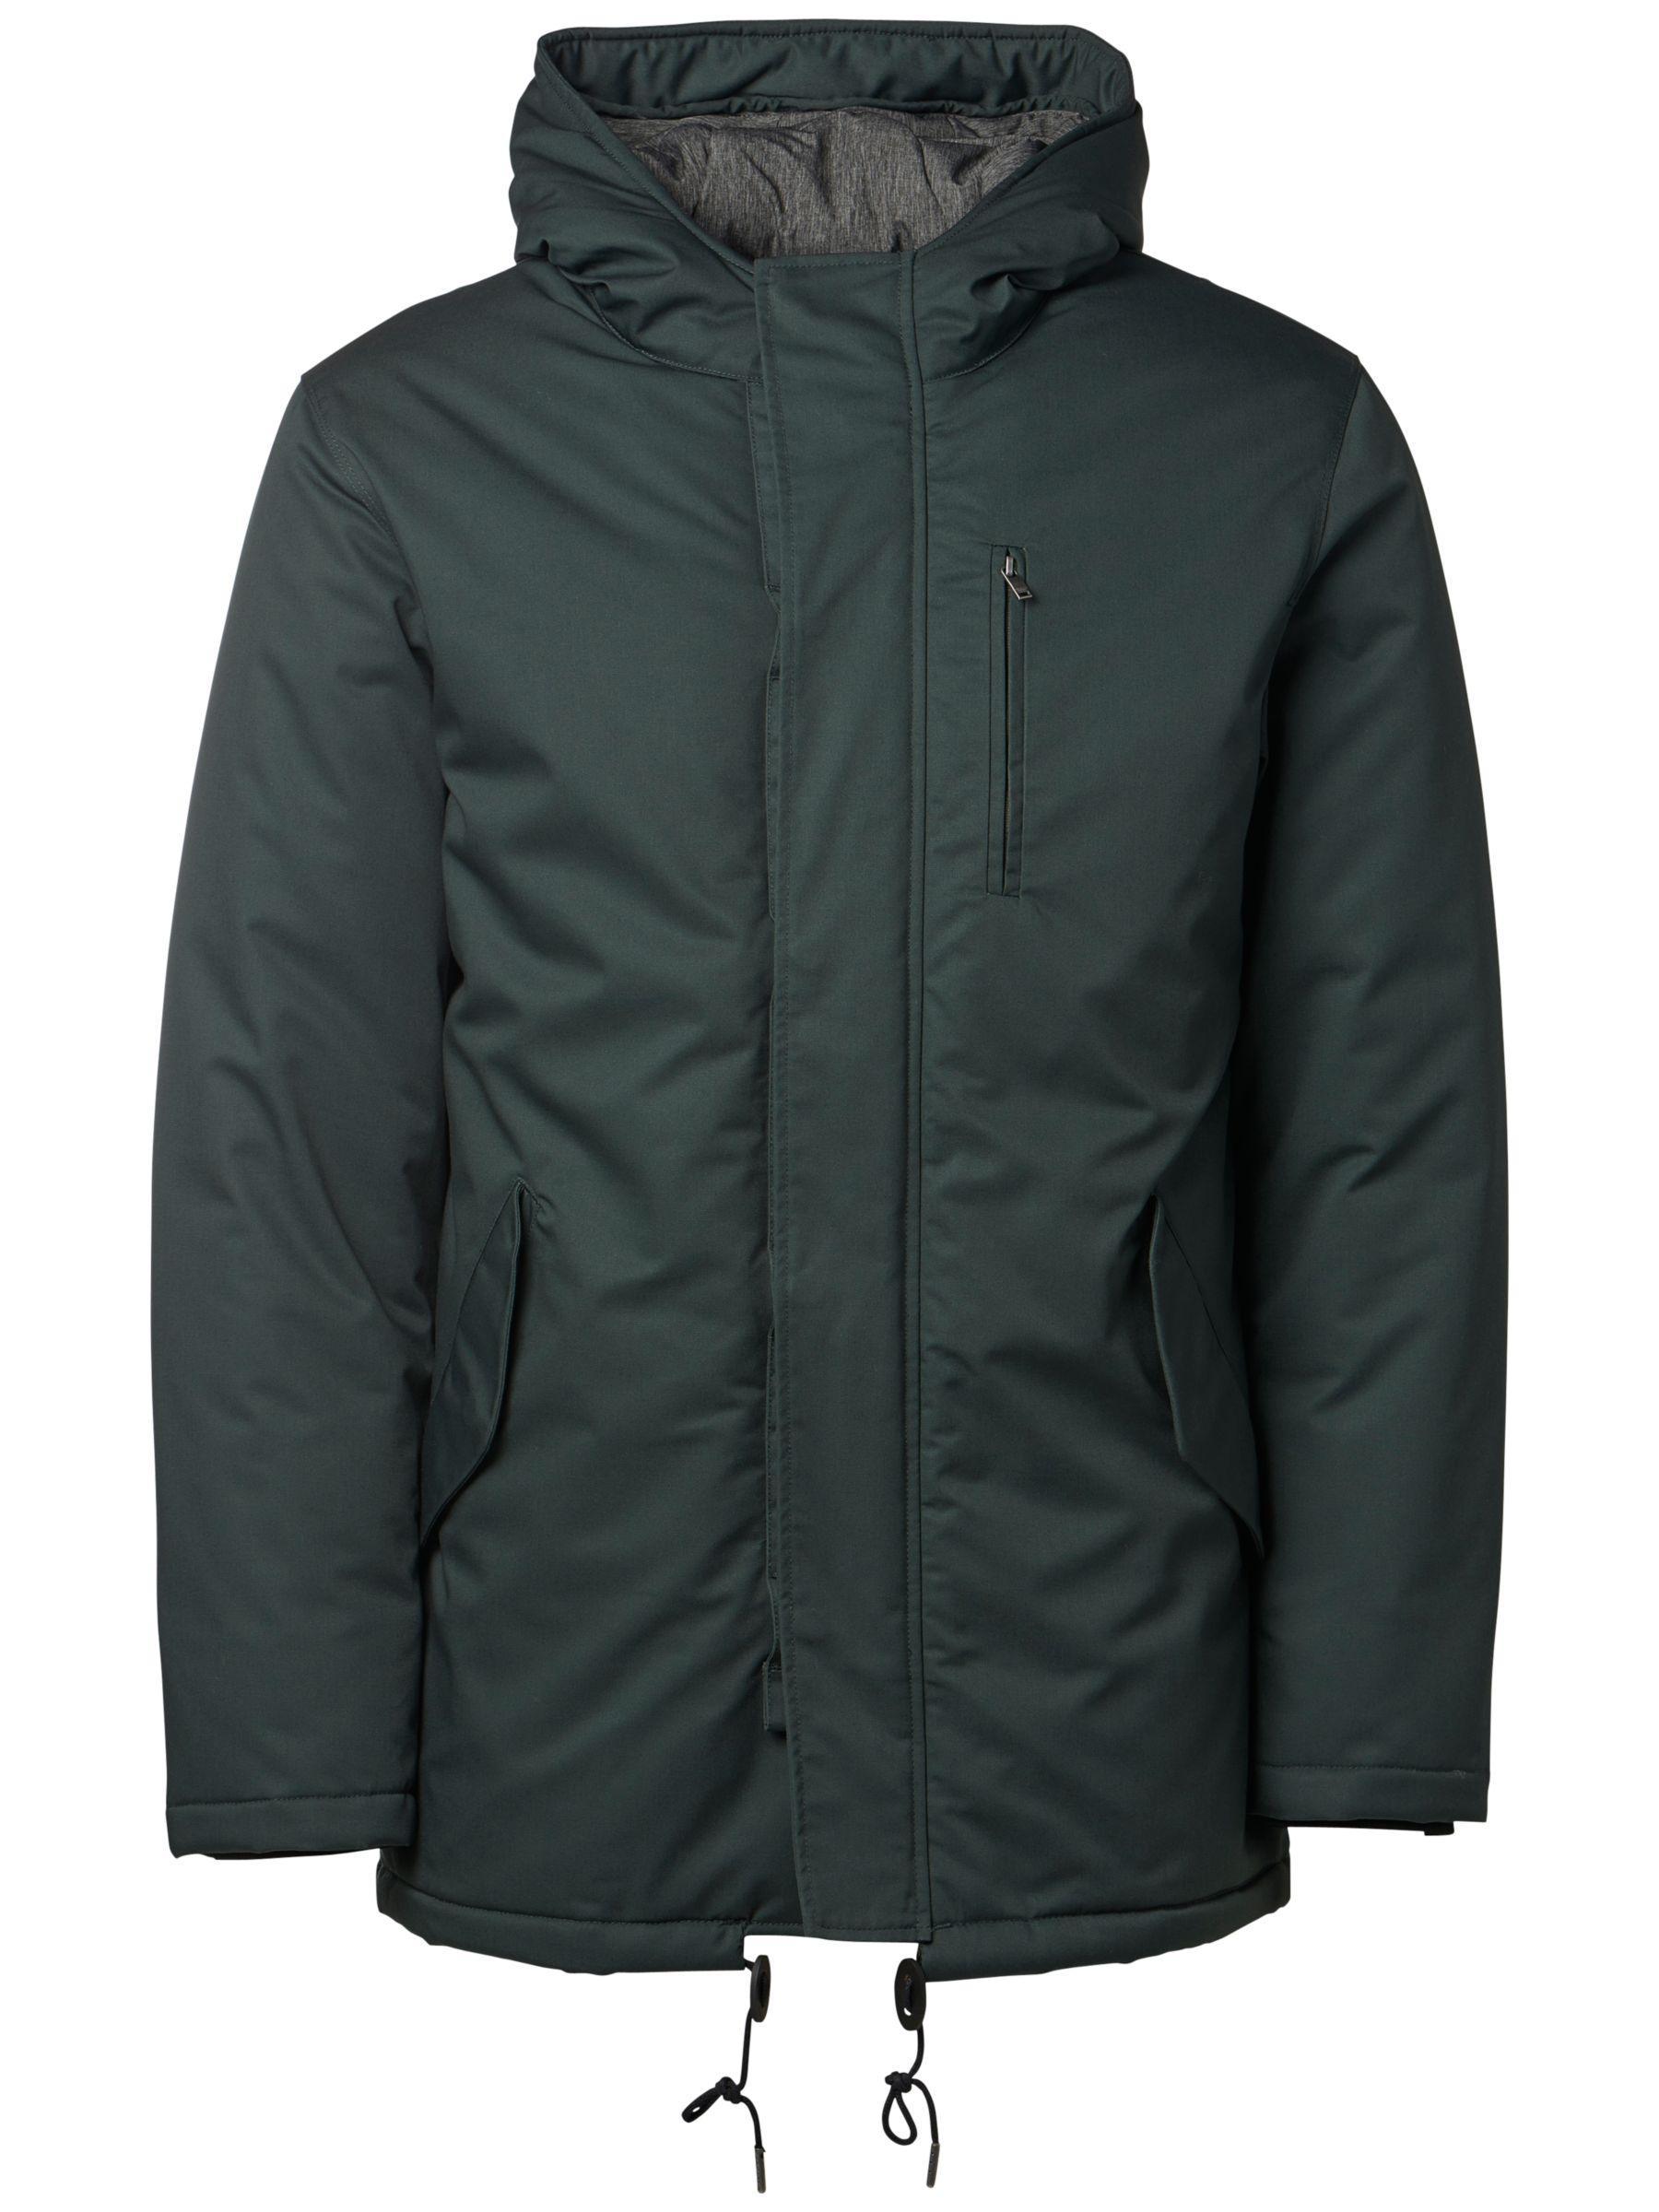 Men's Coats & Jackets | Quilted, Bomber & Leather Jackets | John Lewis